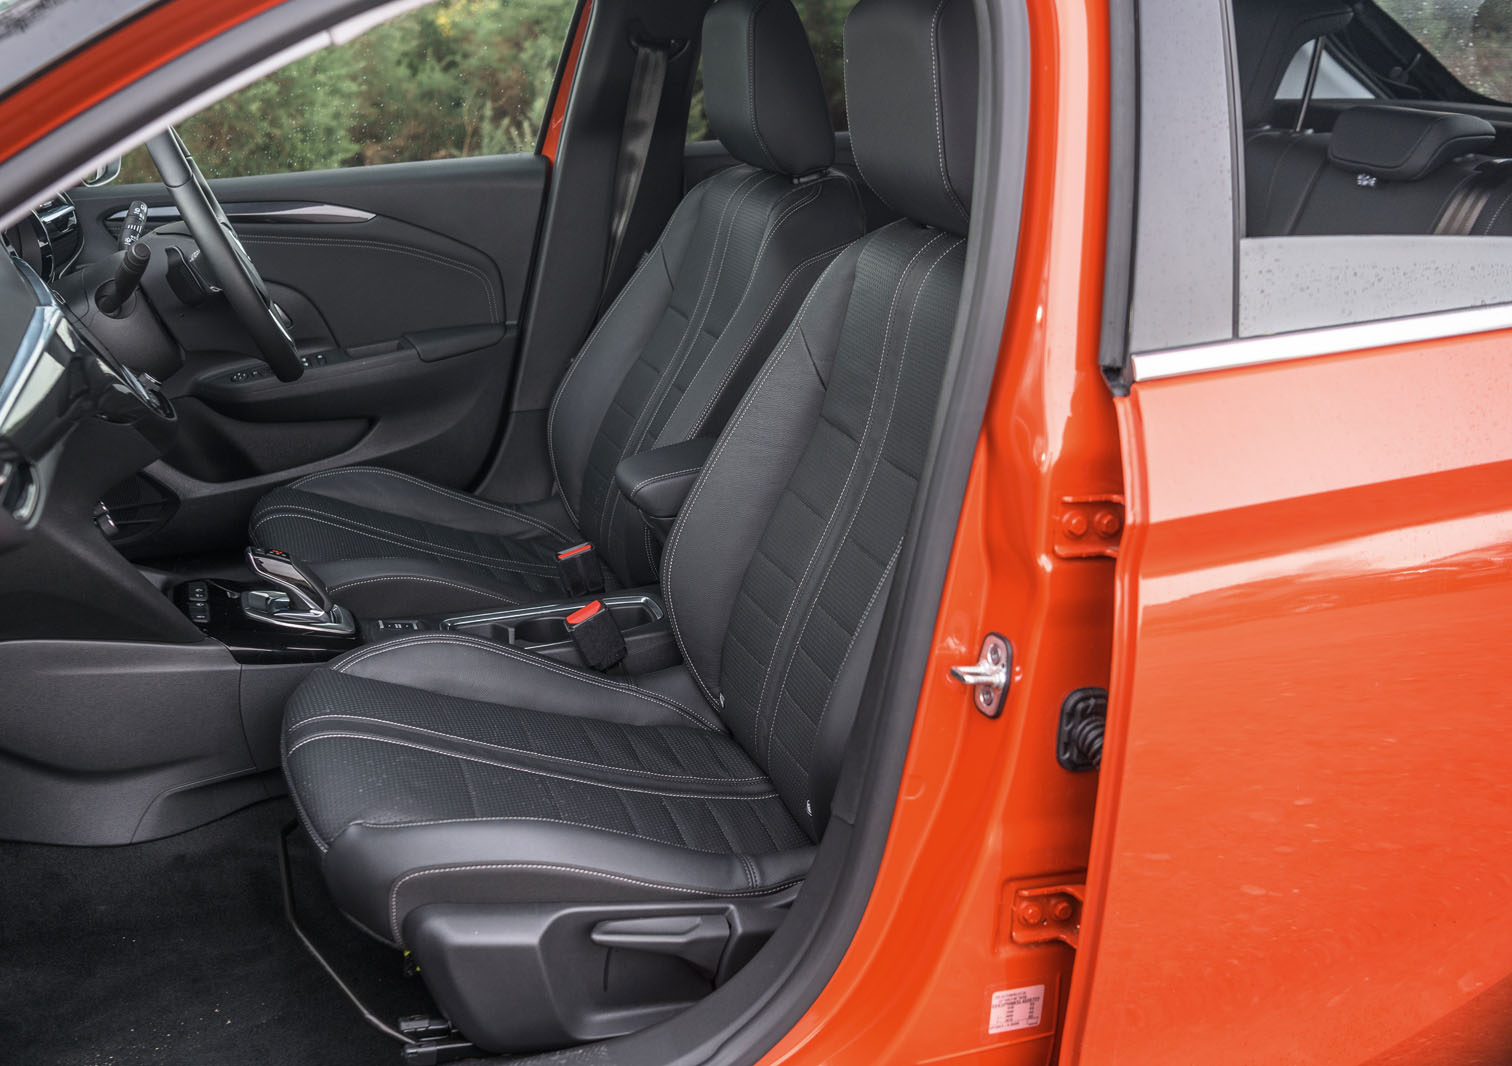 Vauxhall Corsa 2020 road test review - front seats